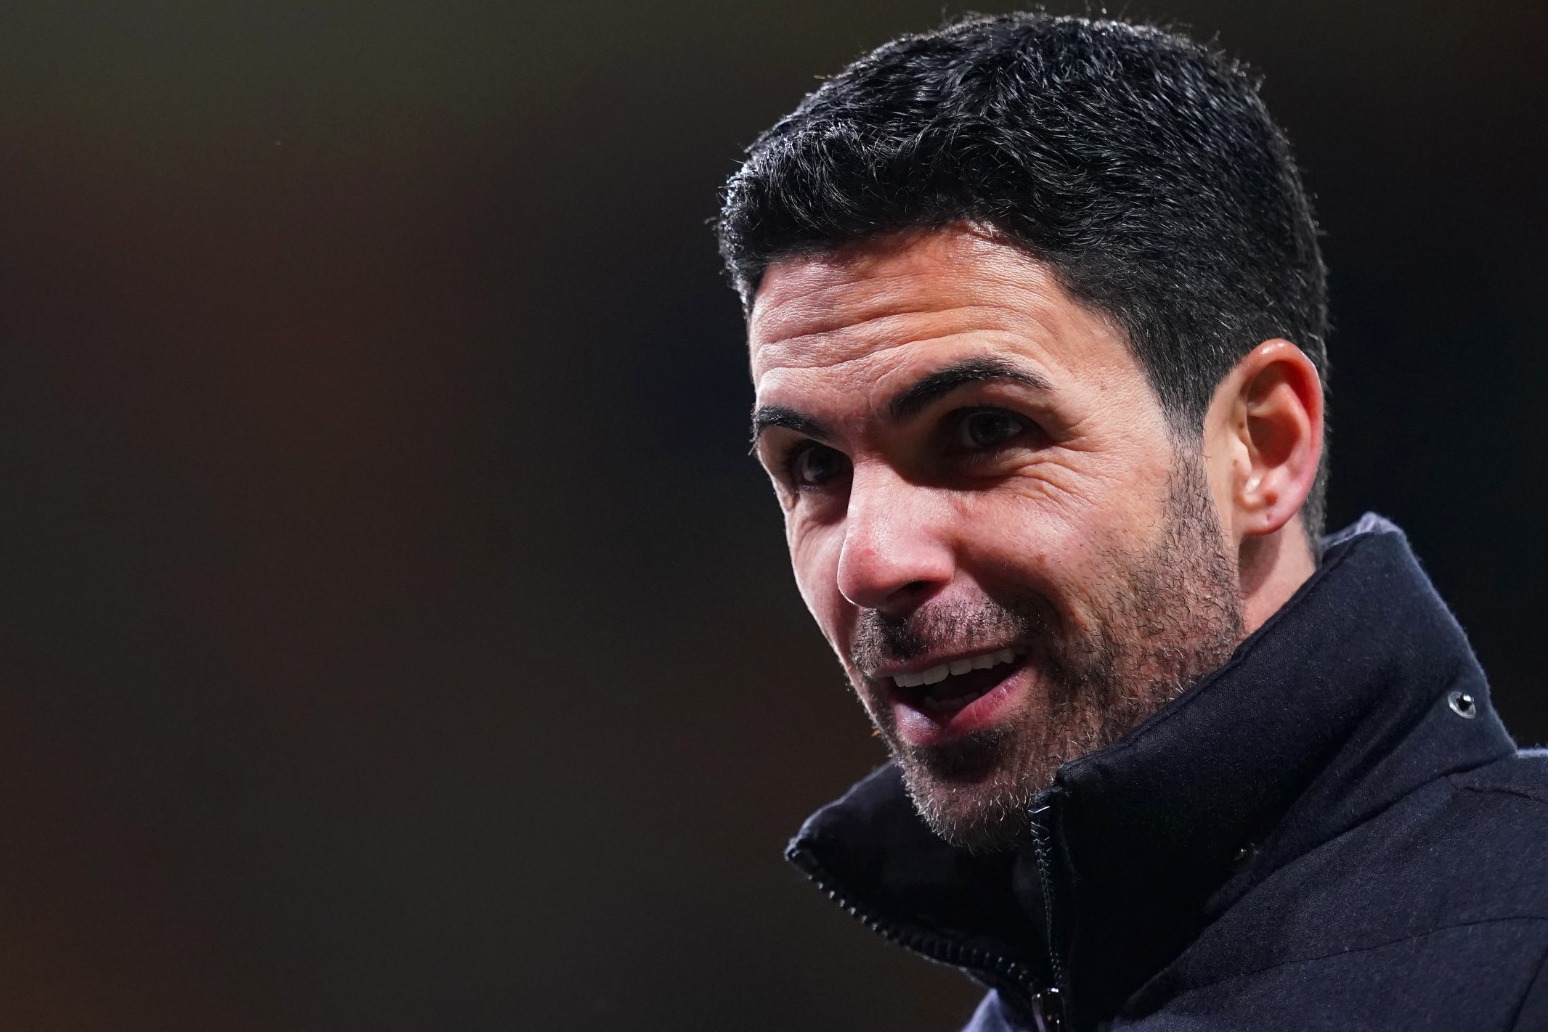 Mikel Arteta focused on Champions League spot after signing new Arsenal deal 